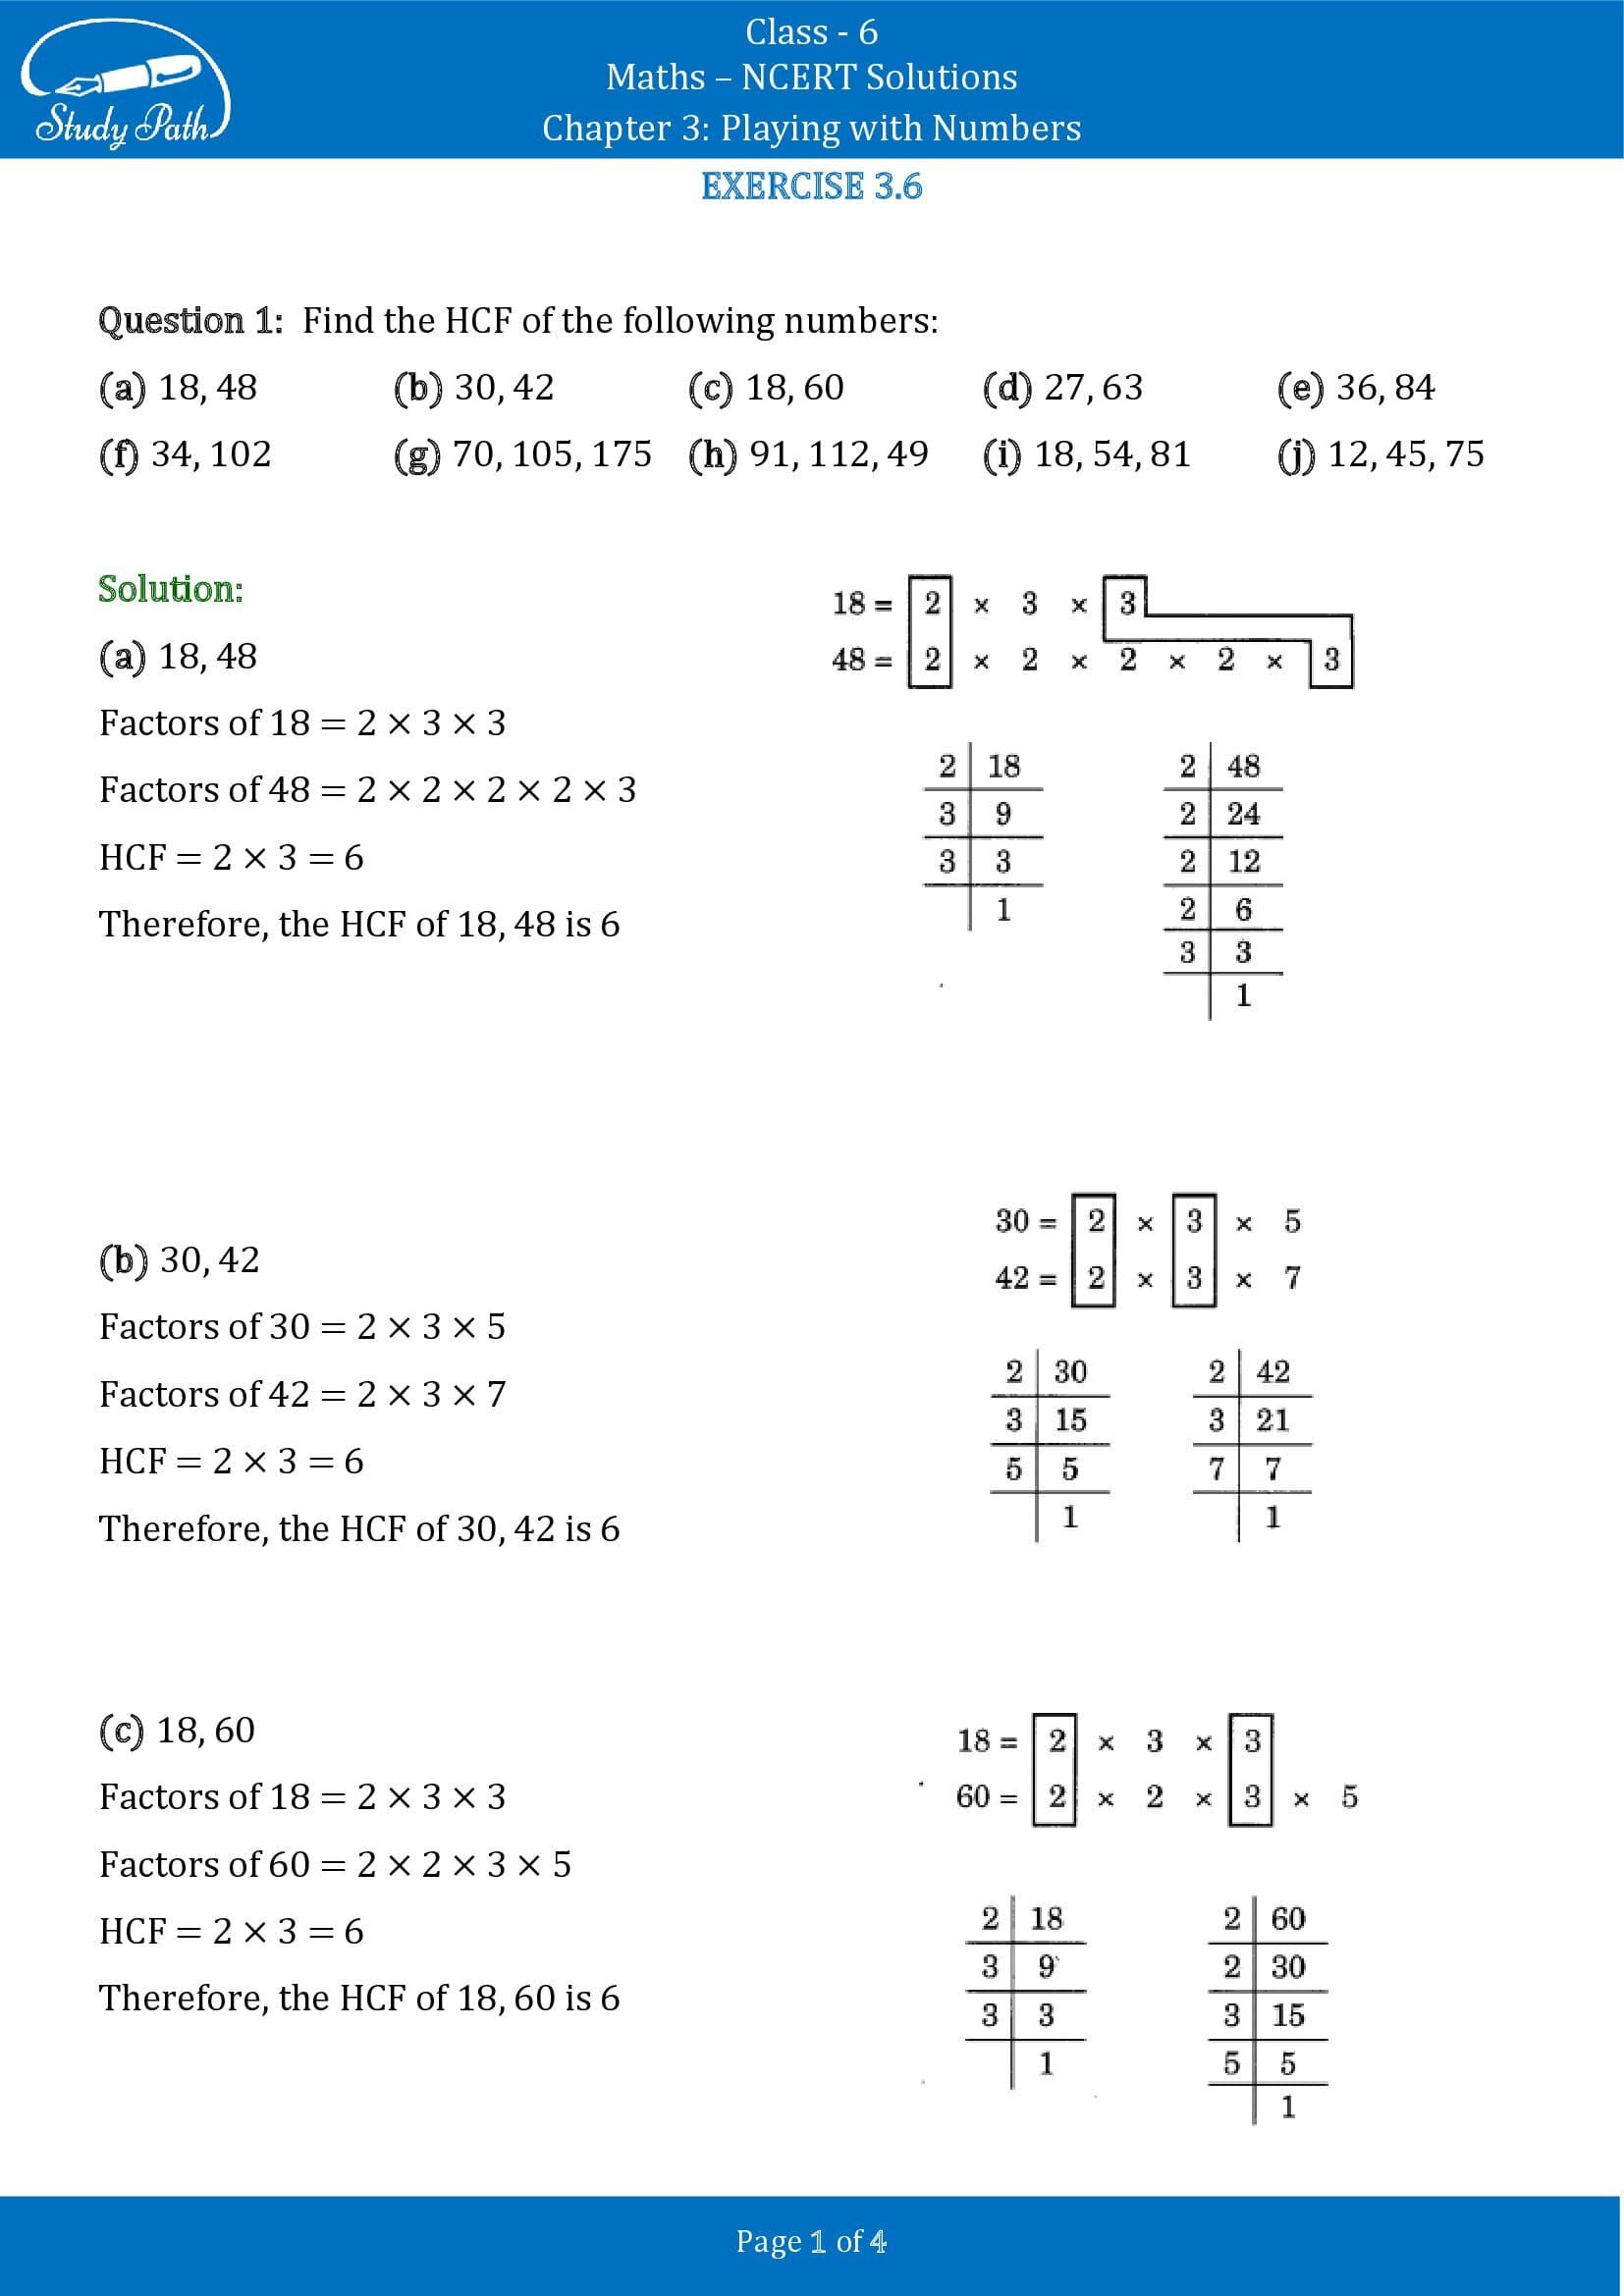 NCERT Solutions for Class 6 Maths Chapter 3 Playing with Numbers Exercise 3.6 00001